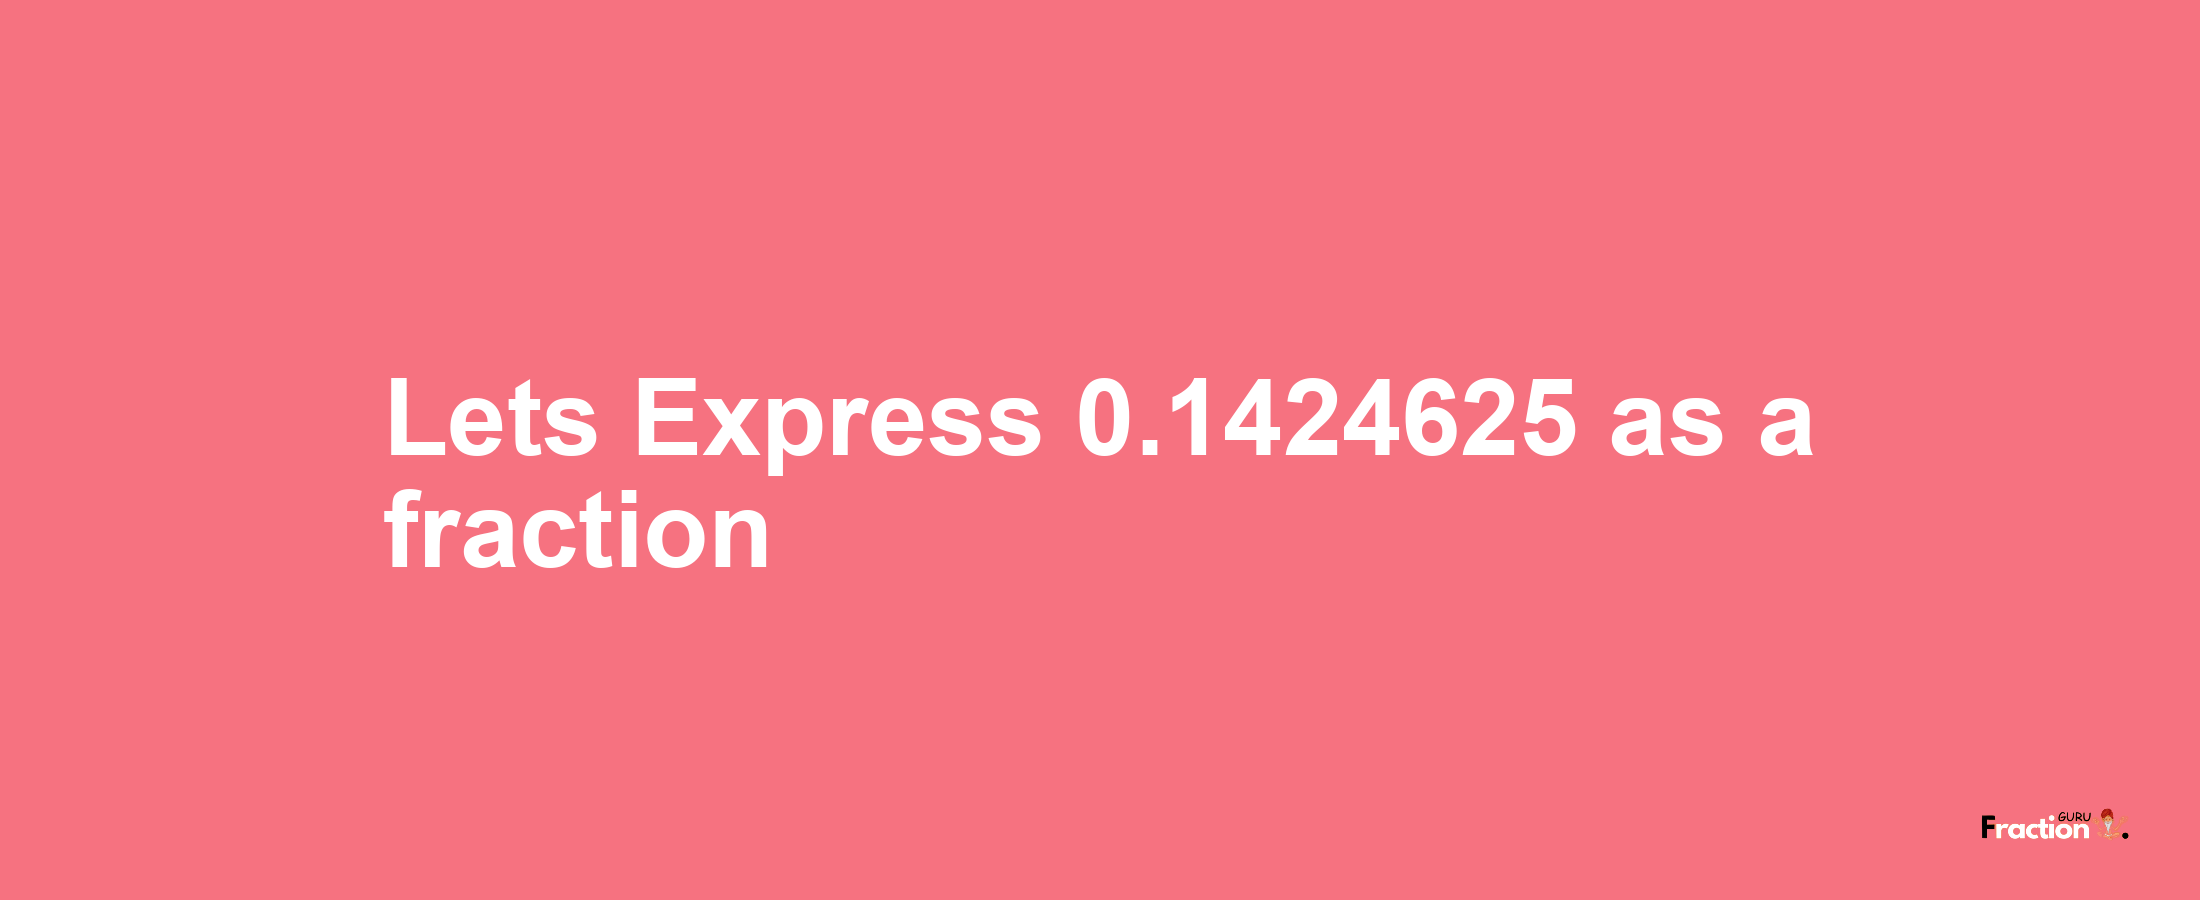 Lets Express 0.1424625 as afraction